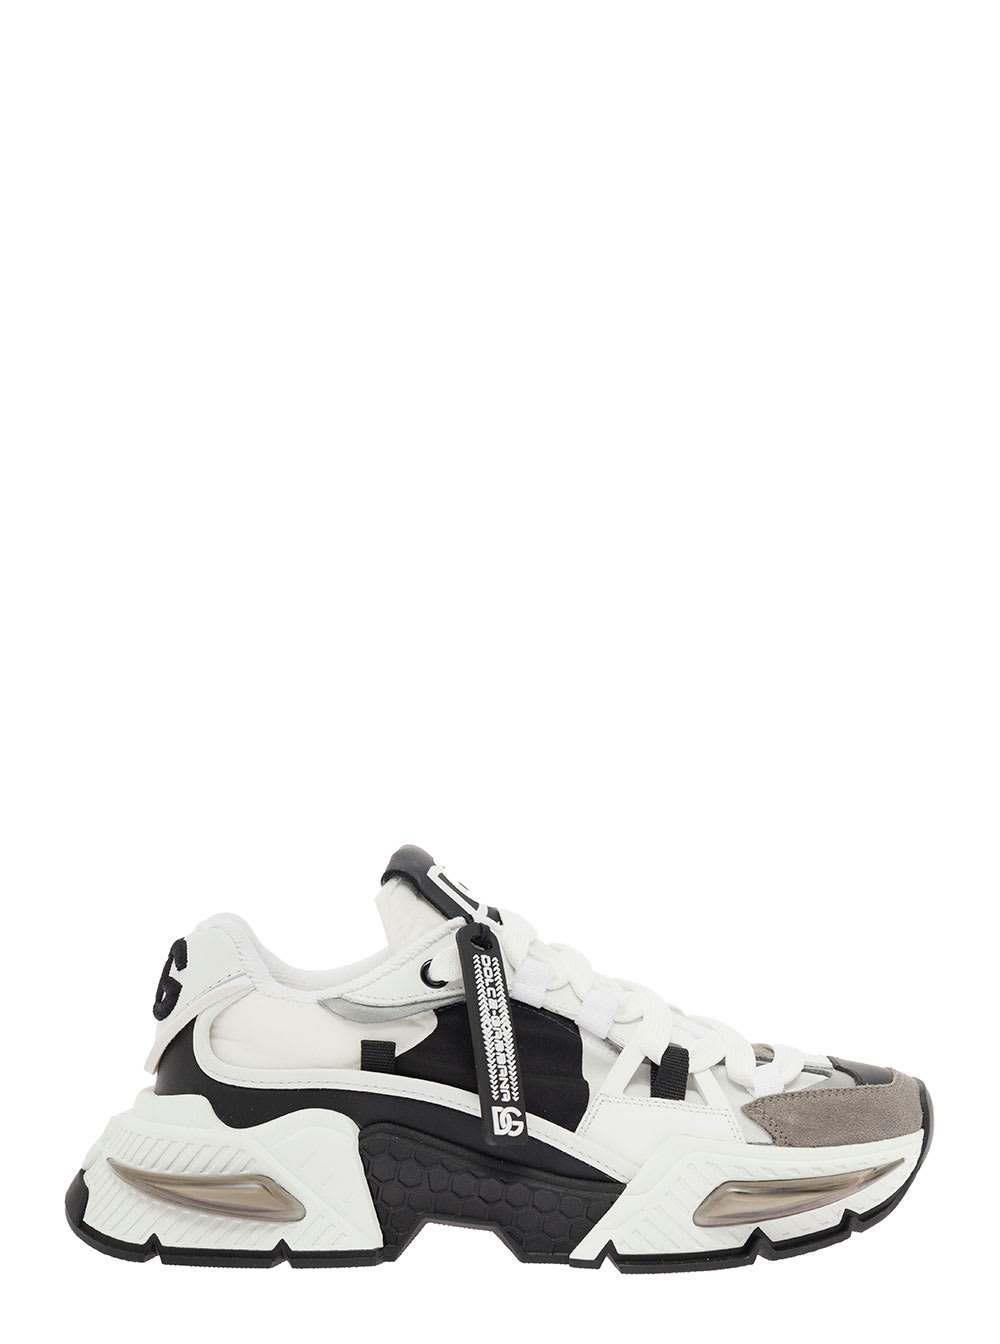 DOLCE & GABBANA DOLCE & GABBANA WOMANS MIX OF MATERIALS AIRMASTER trainers